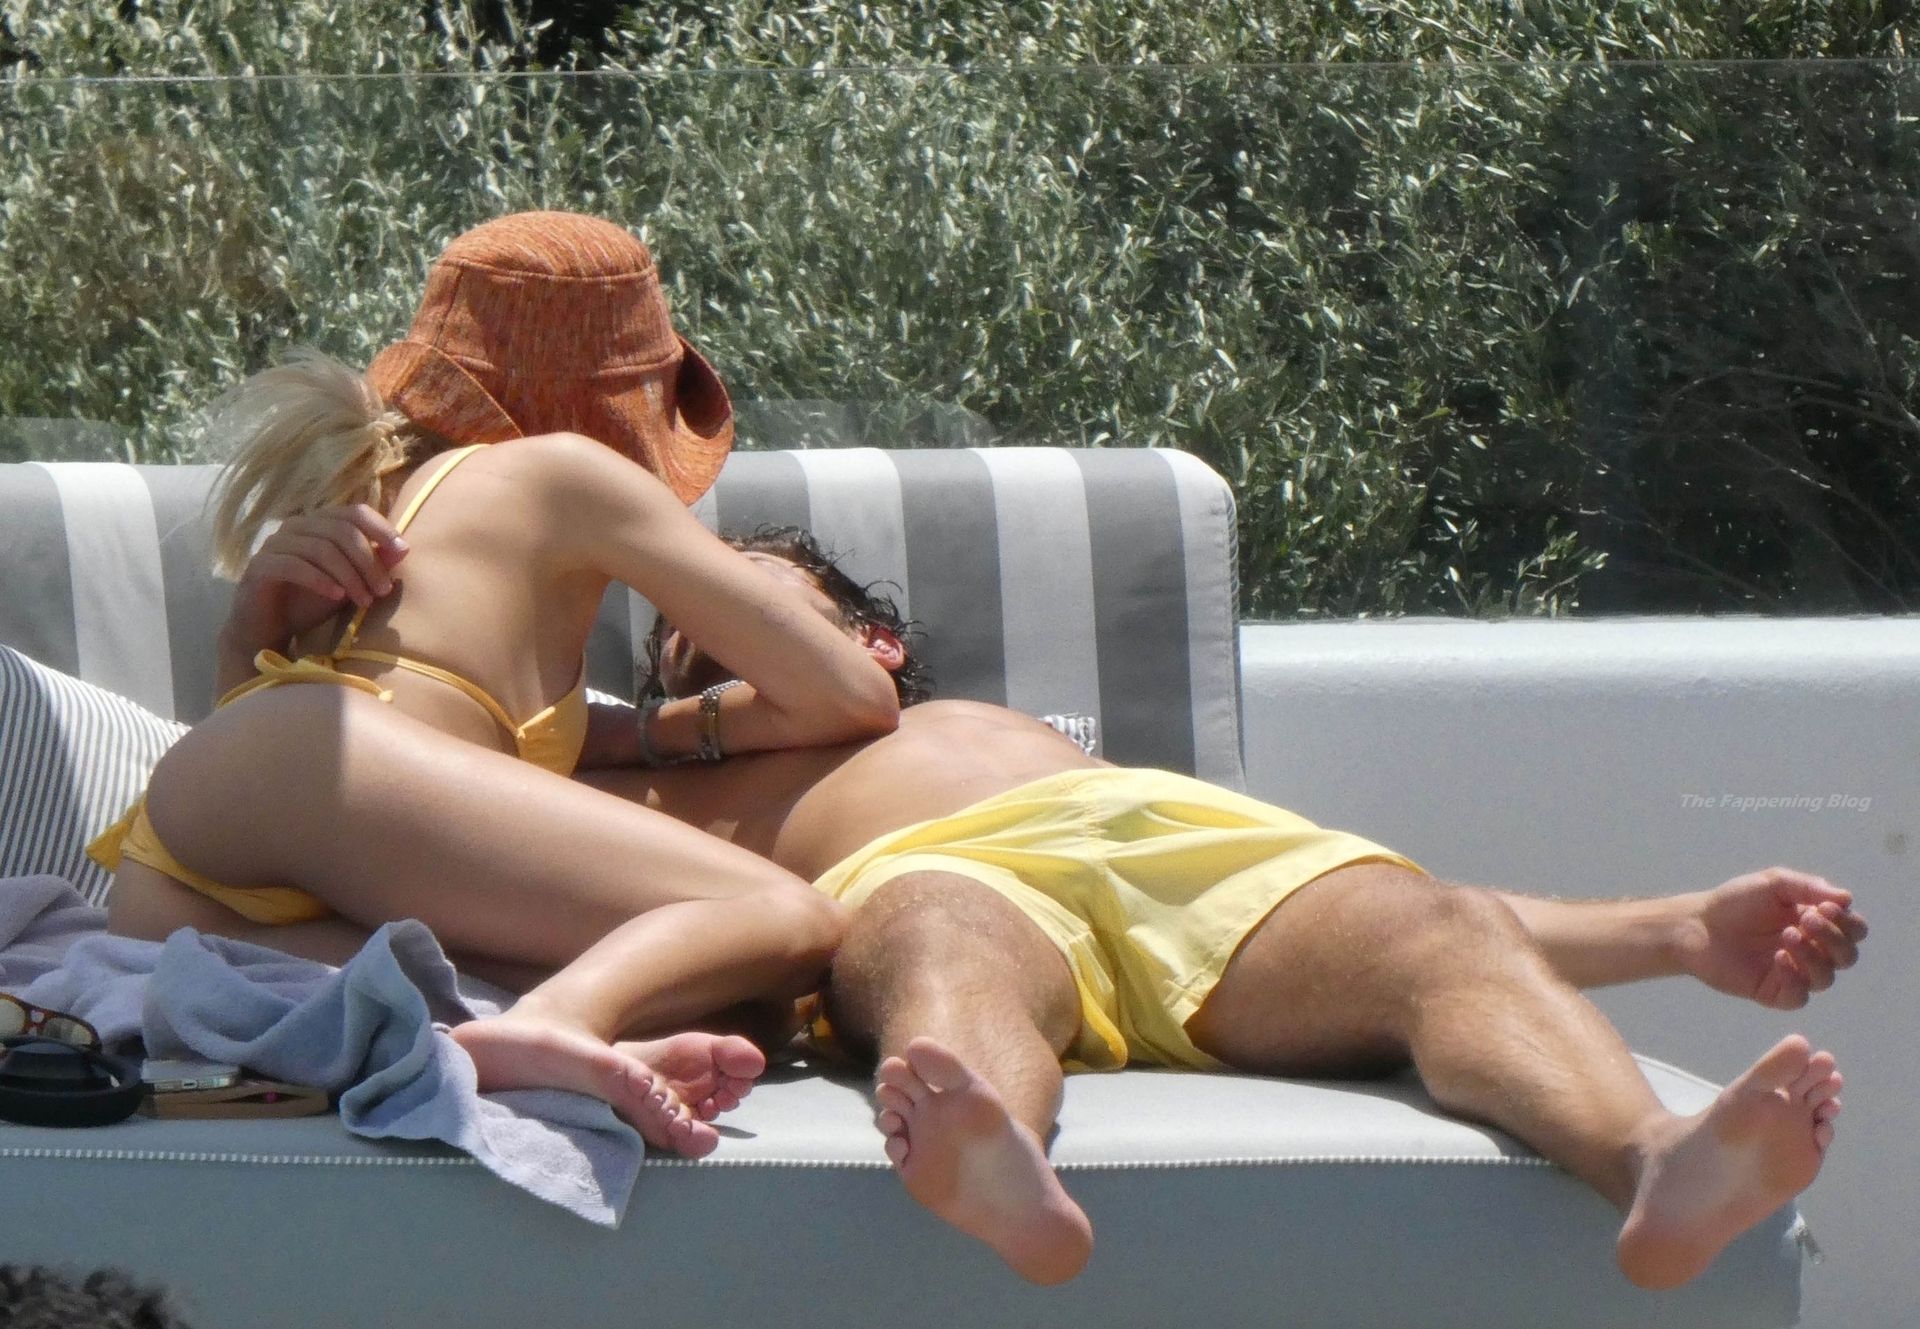 Delilah Belle Hamlin with Her Boyfriend Pack on the PDA on Their Greek Holiday (60 Photos)